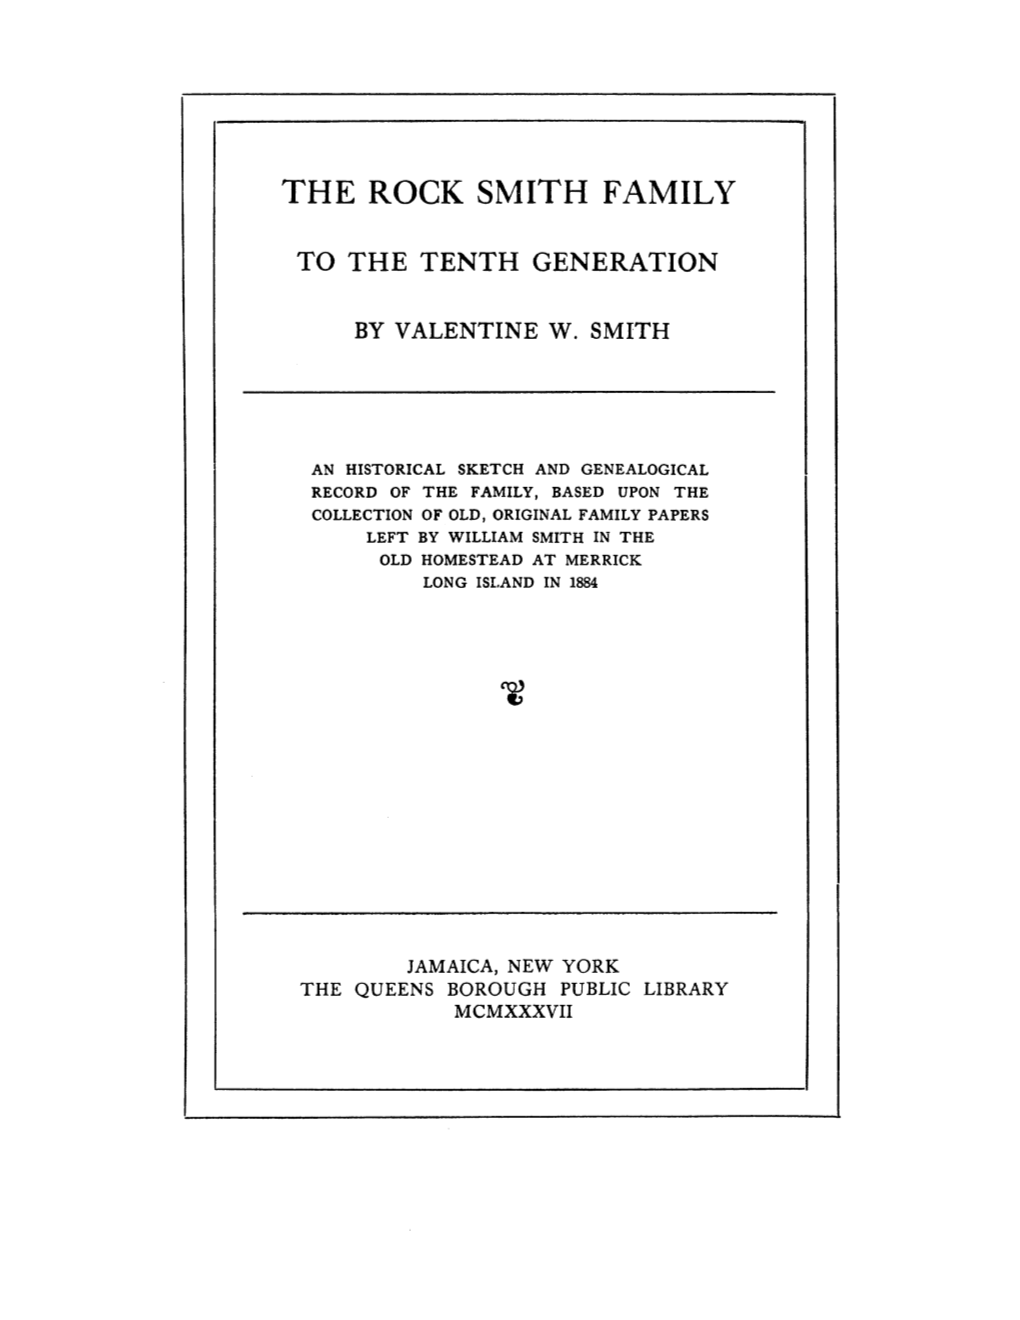 "Rock" Smith Family There